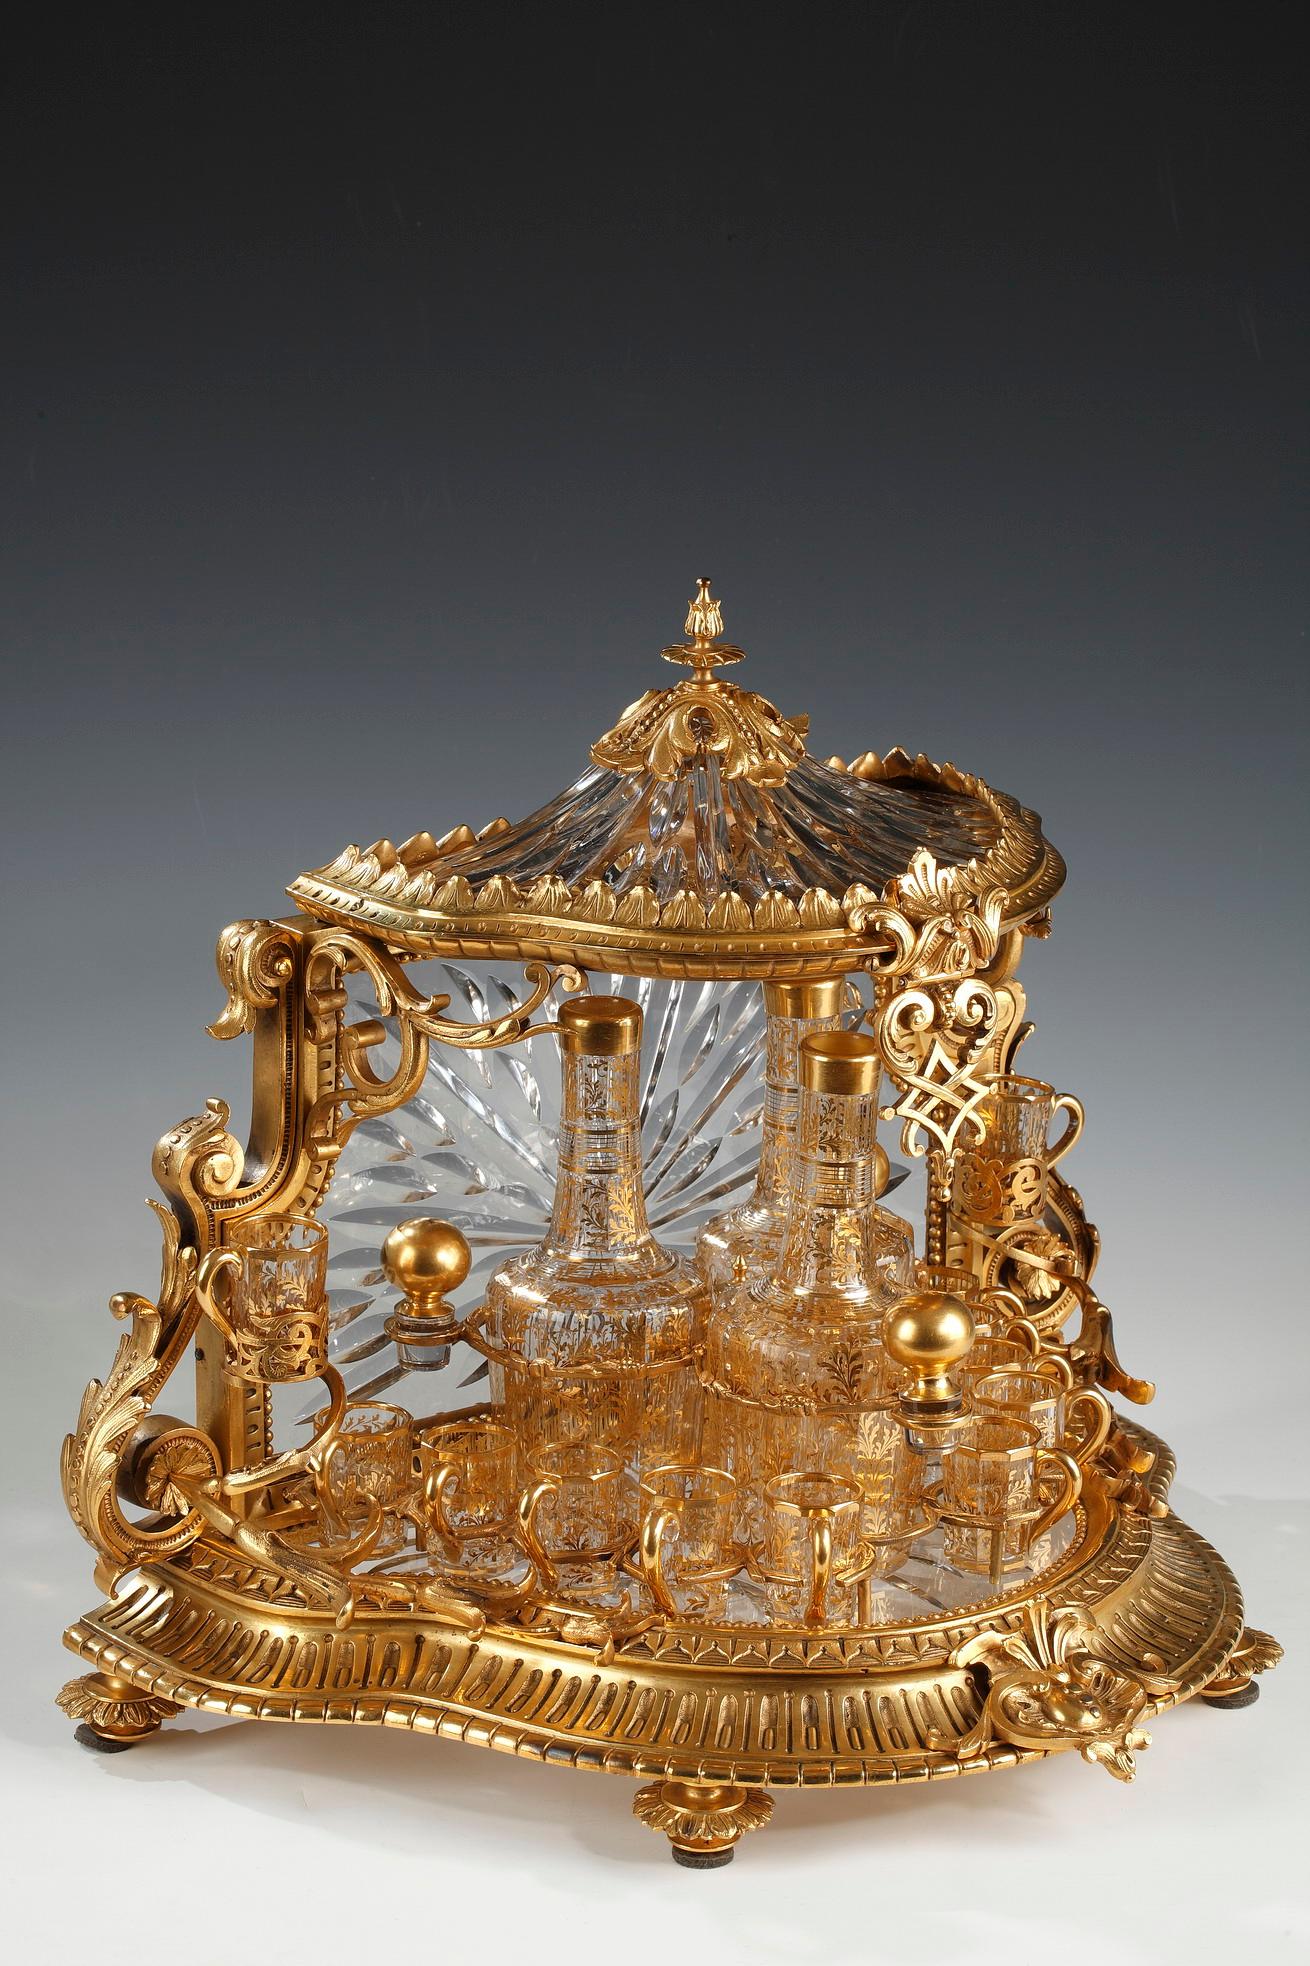 Rare dome-shaped liquor casket entirely in cut crystal, enriched with a beautiful gilded bronze mount with scalloped lines decorated with friezes of water leaves, beads, scrolls and shell. It includes three carafes and twelve faceted cut crystal